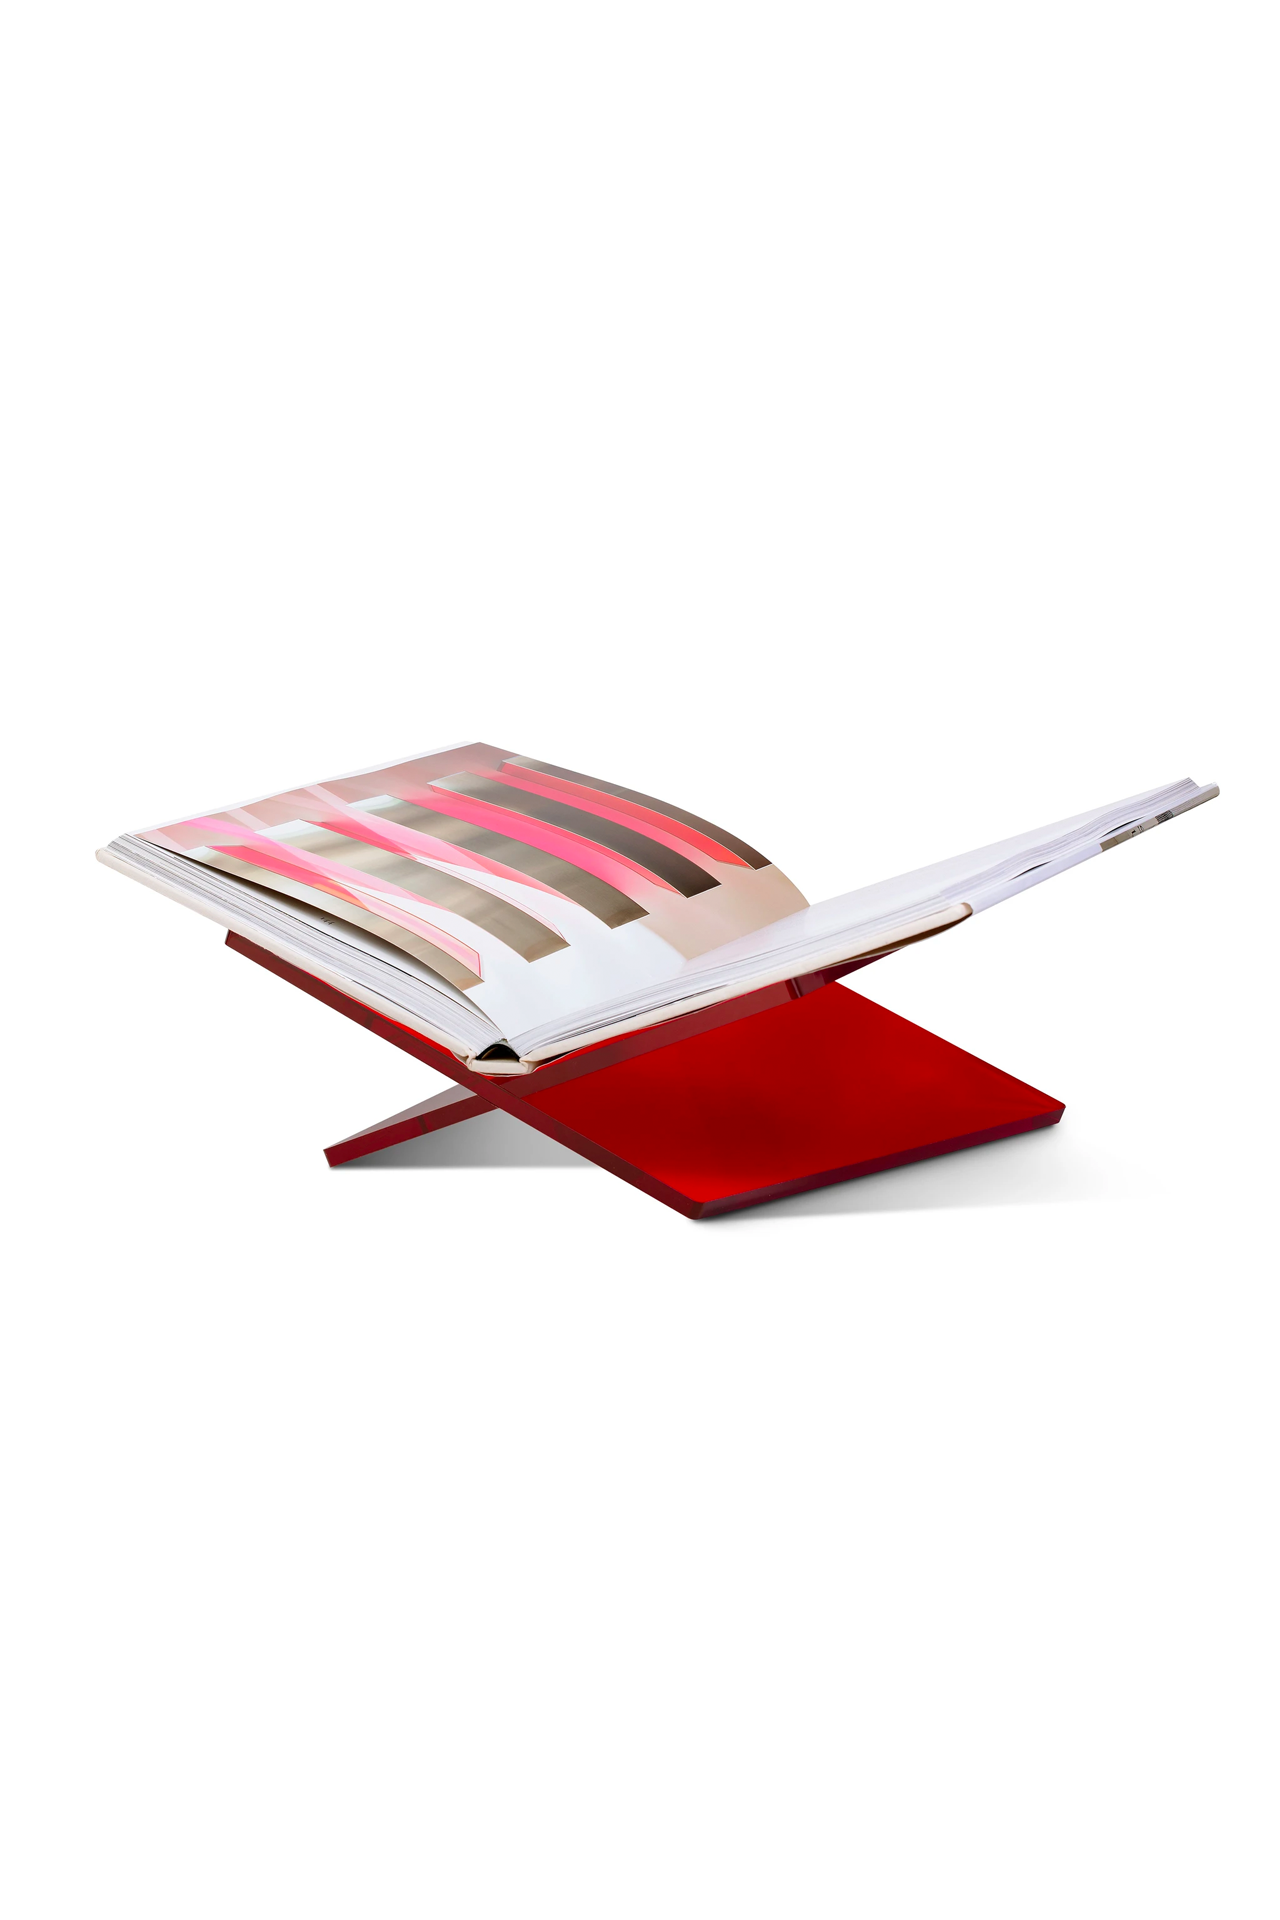 Assouline A Bookstand Red with a Book Image (6637675905139)